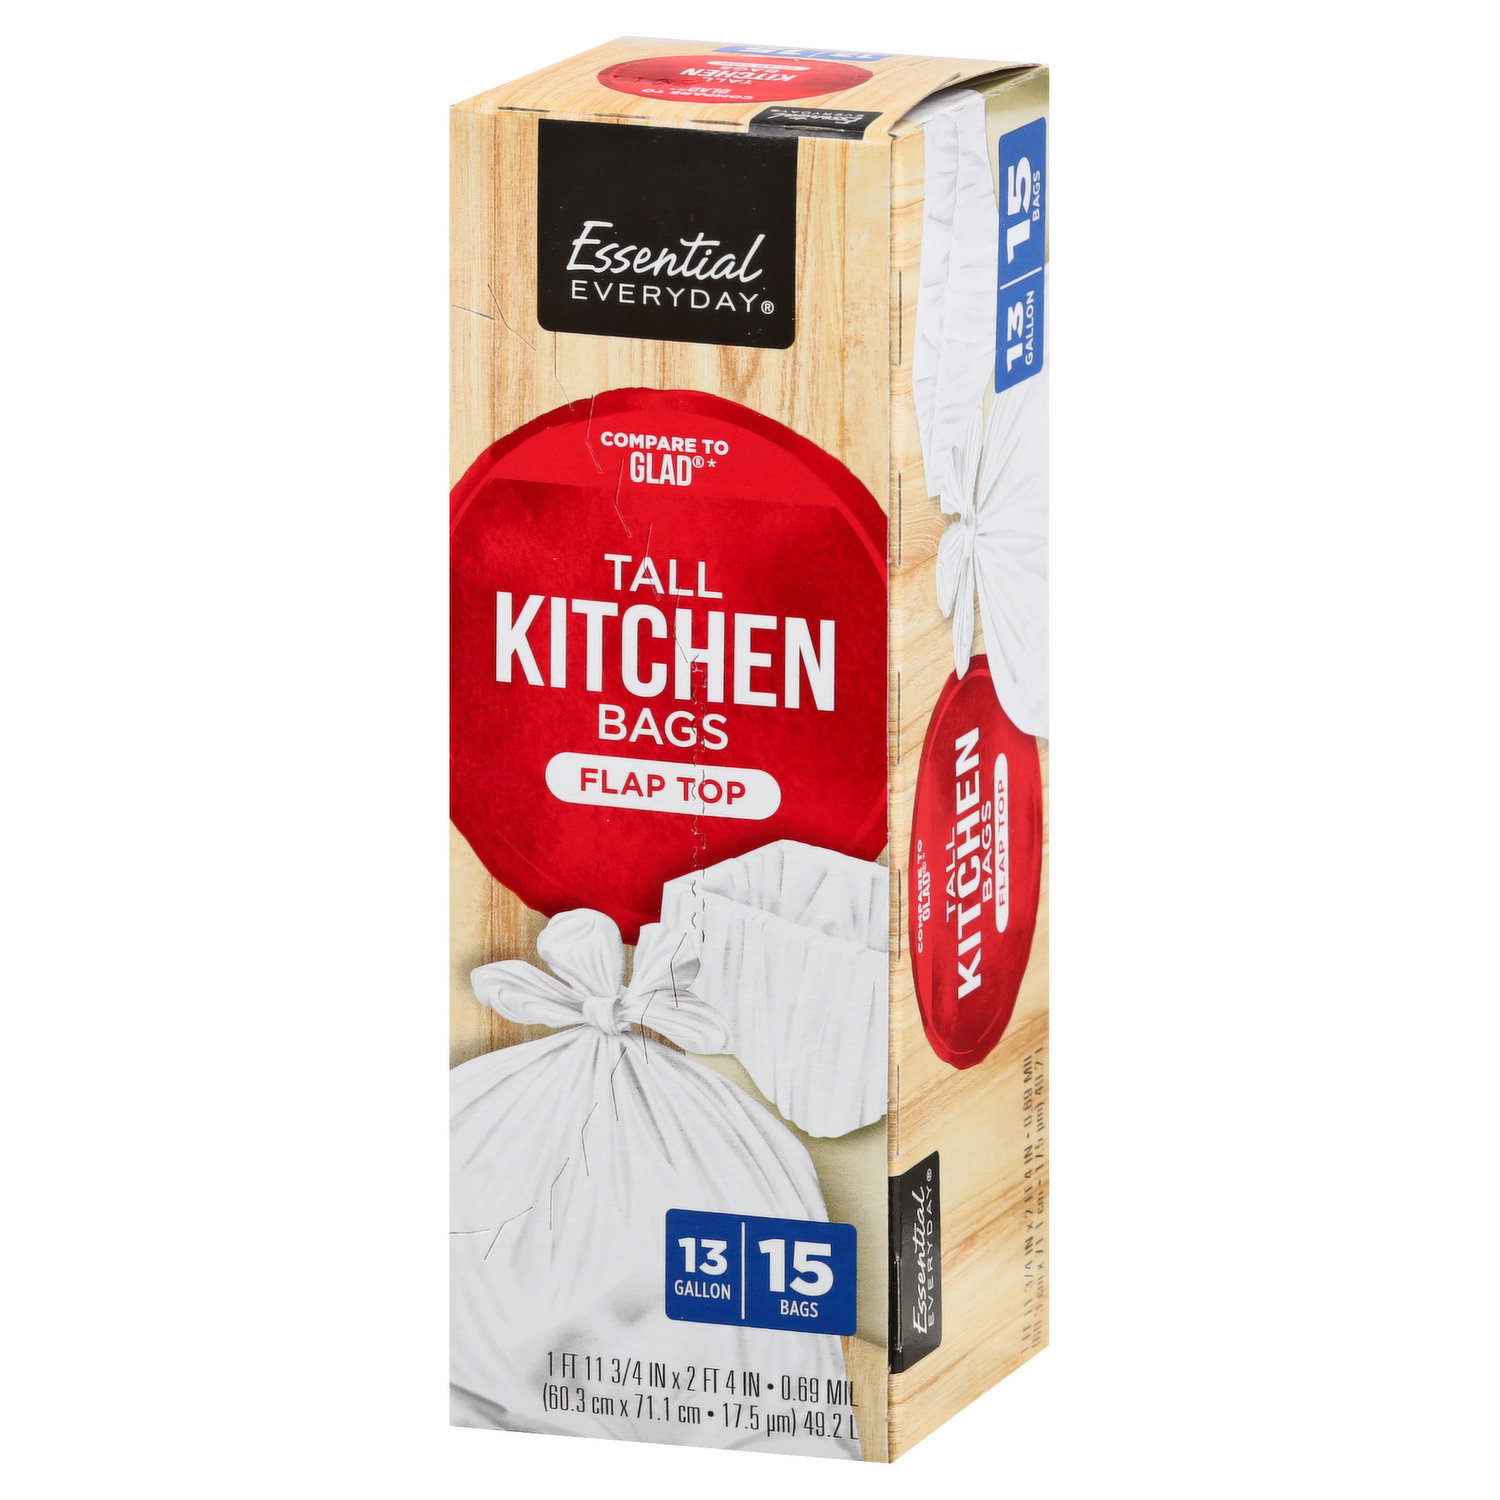 Essential Everyday Tall Flap Top Kitchen Garbage Bags